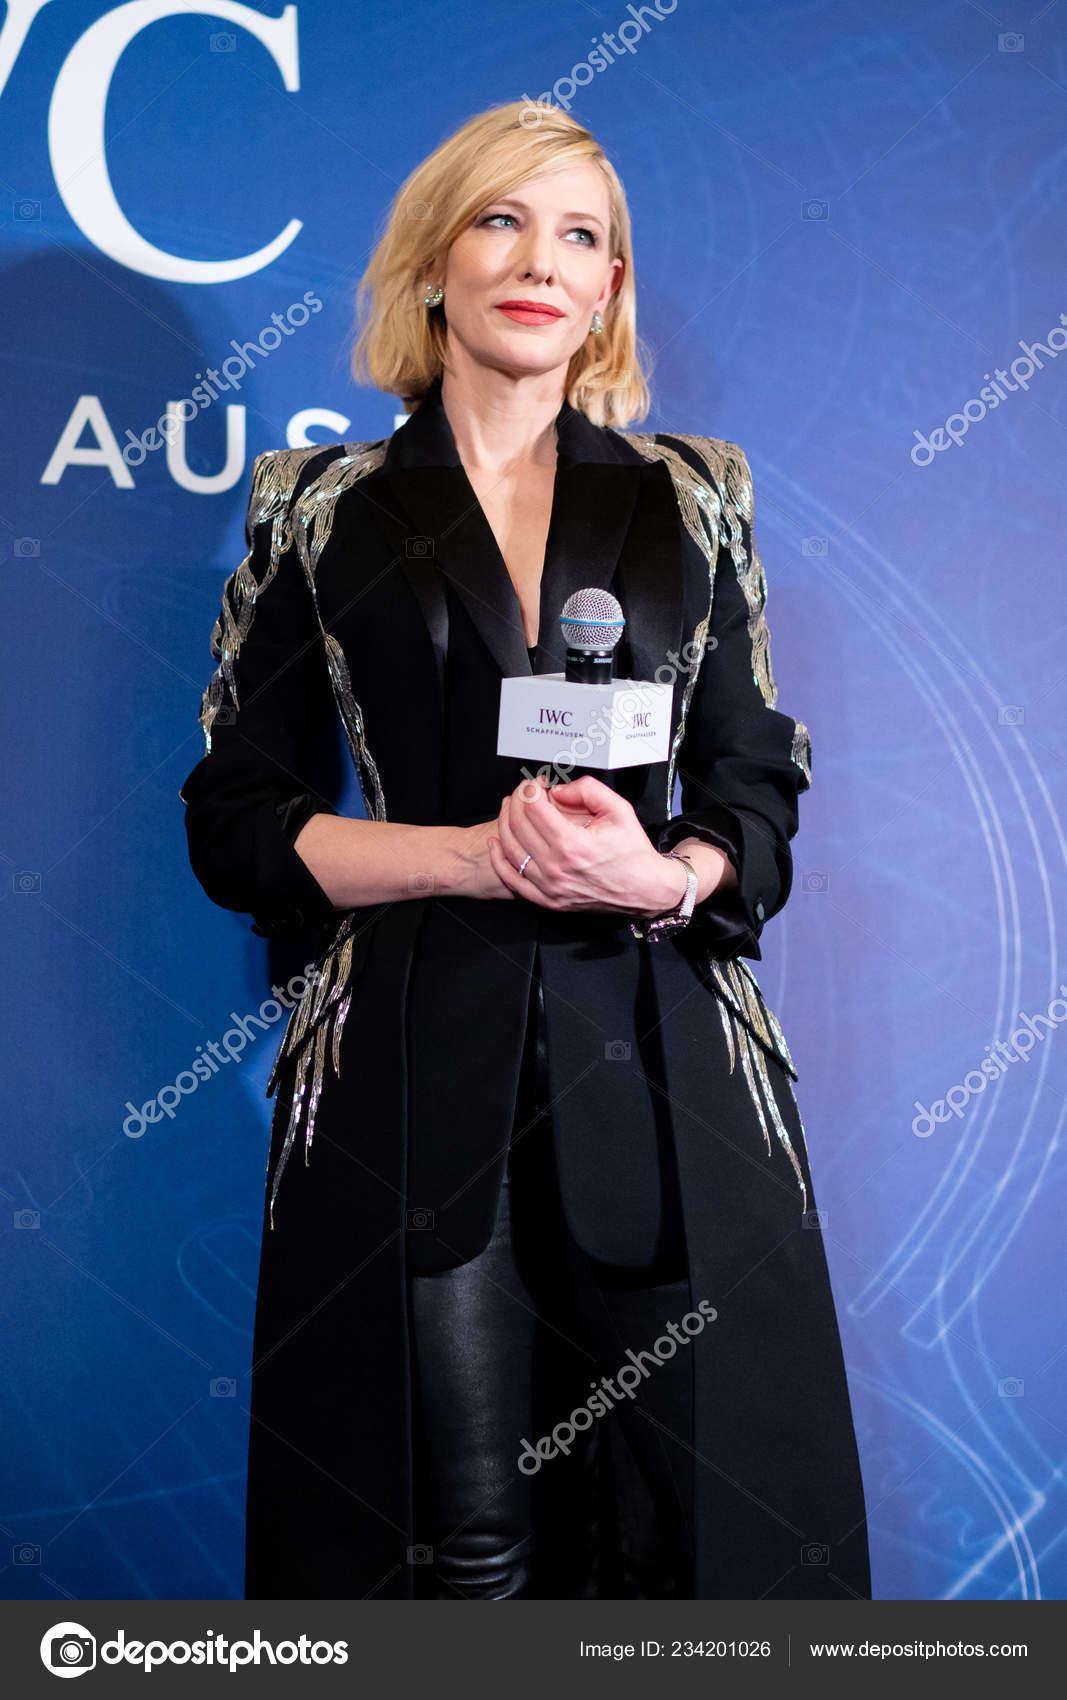 Australian Actress Cate Blanchett Attends Promotional Event Iwc Shanghai China – Stock Editorial Photo ChinaImages #234201026